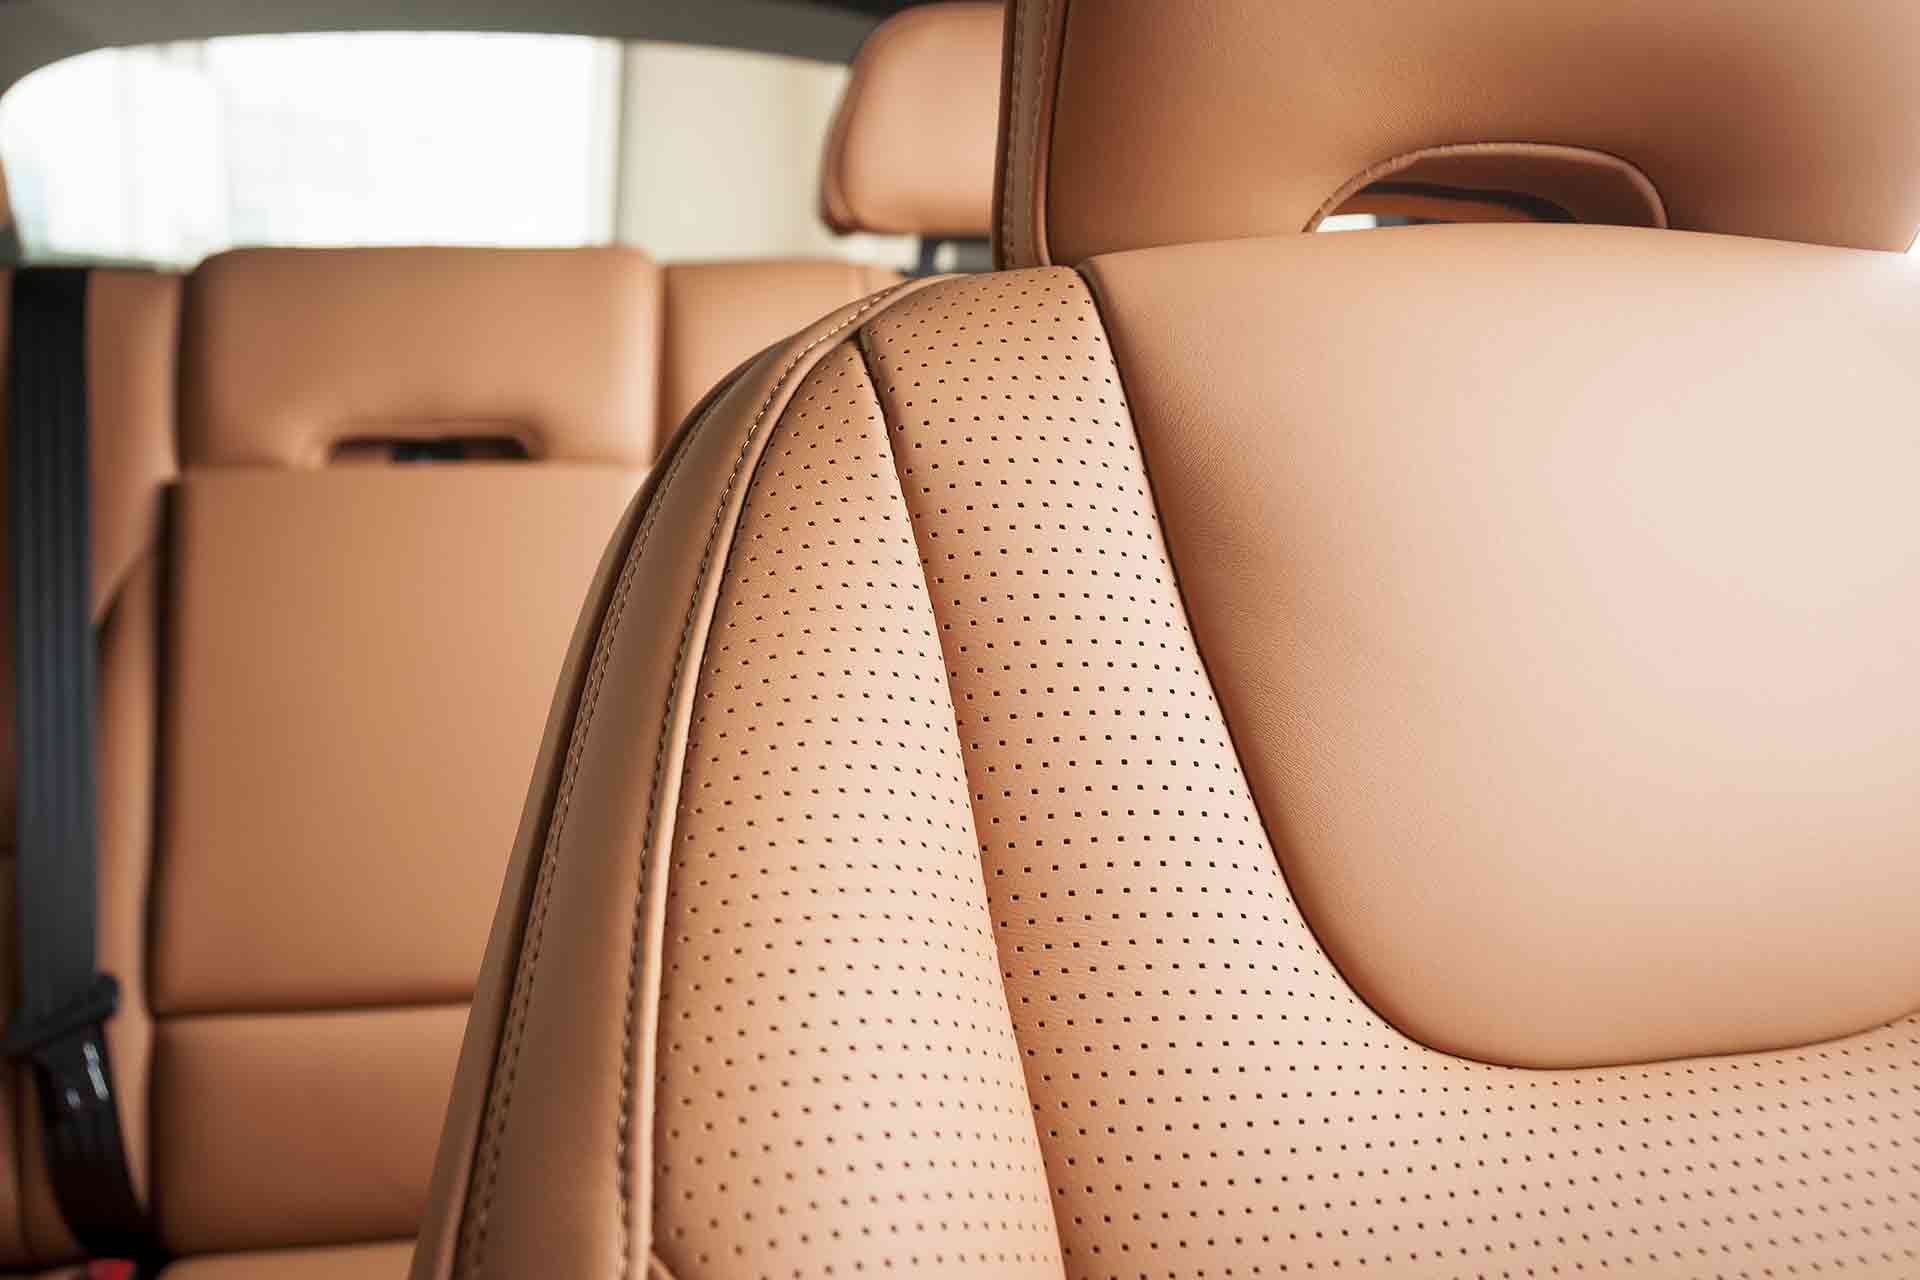 How do I clean car seats? Step-by-step guide to cleaning leather, fabric  and suede interiors